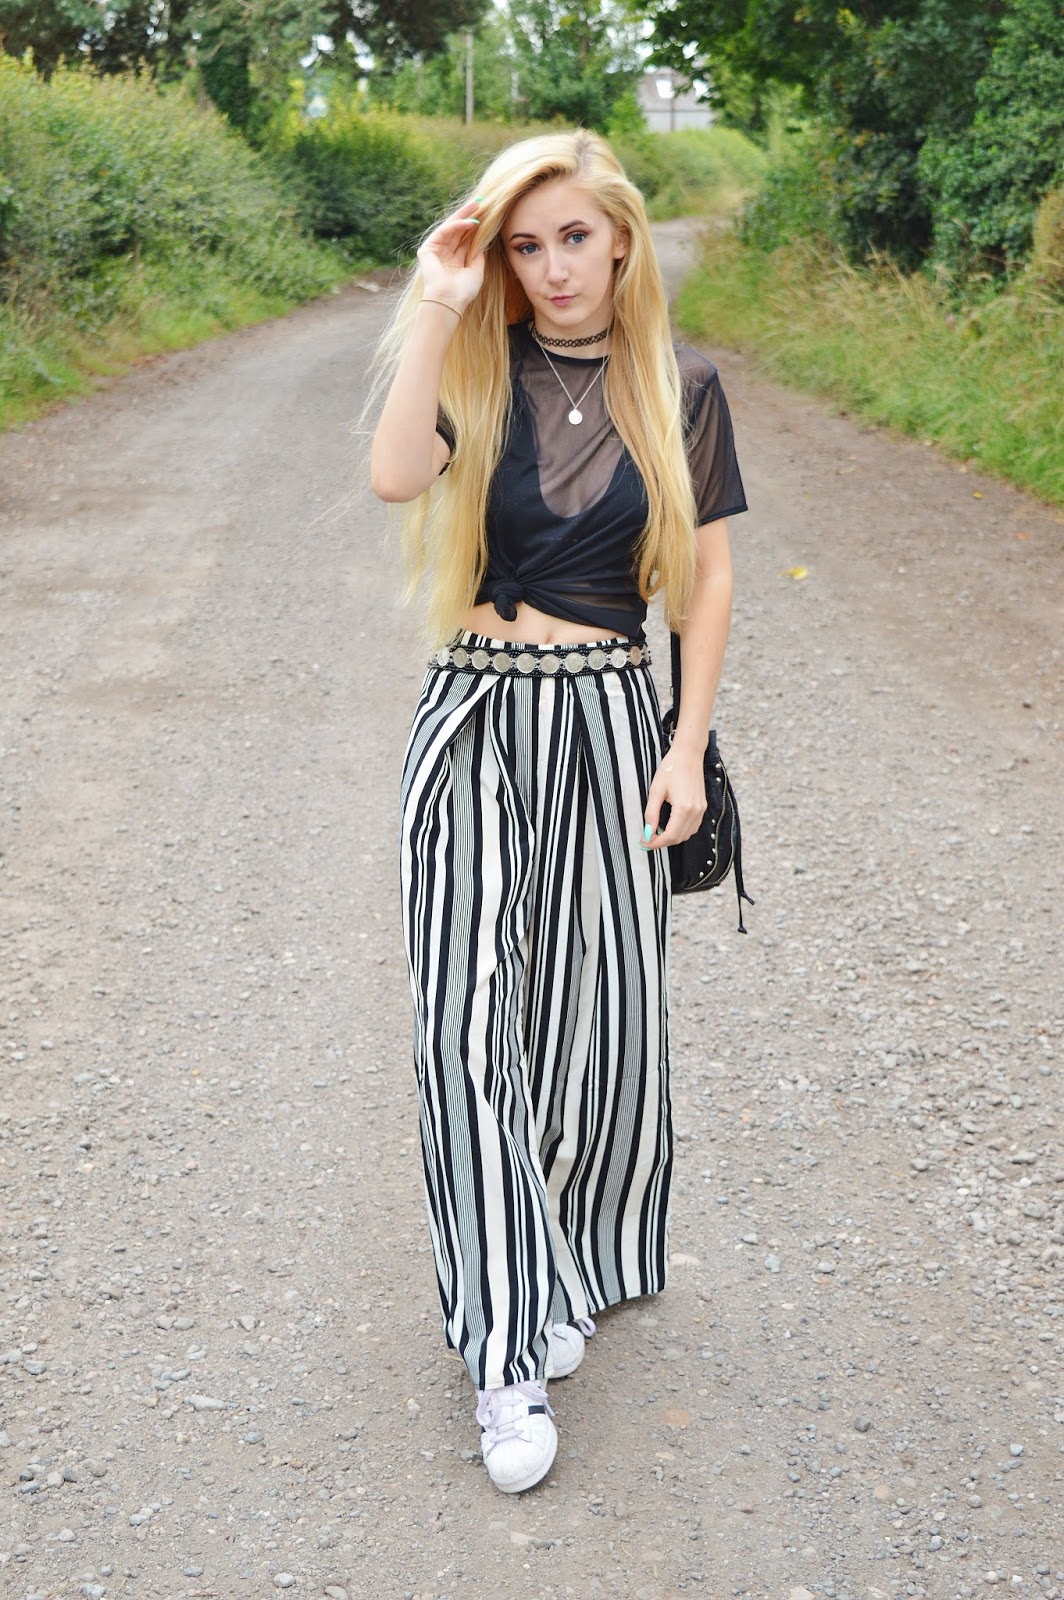 Monochrome outfit